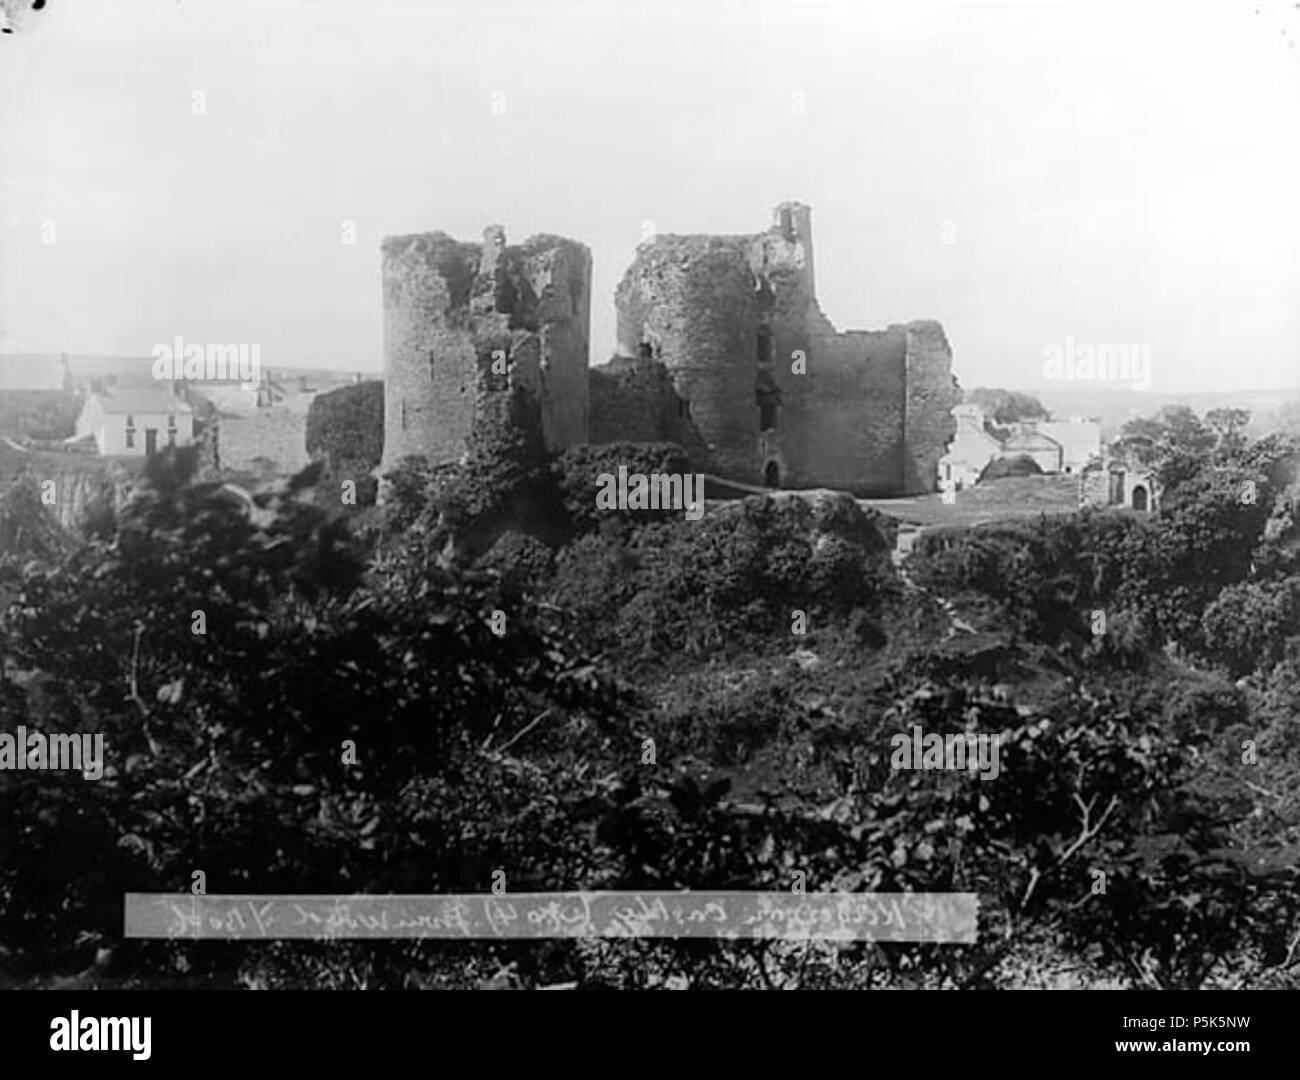 [A view of Cilgerran castle from the wood] [graphic].. 1 negative : glass, dry plate, b&w ; 16.5 x 21.5 cm. circa 1885. Thomas, John, 47 A view of Cilgerran castle from the wood NLW3361150 Stock Photo